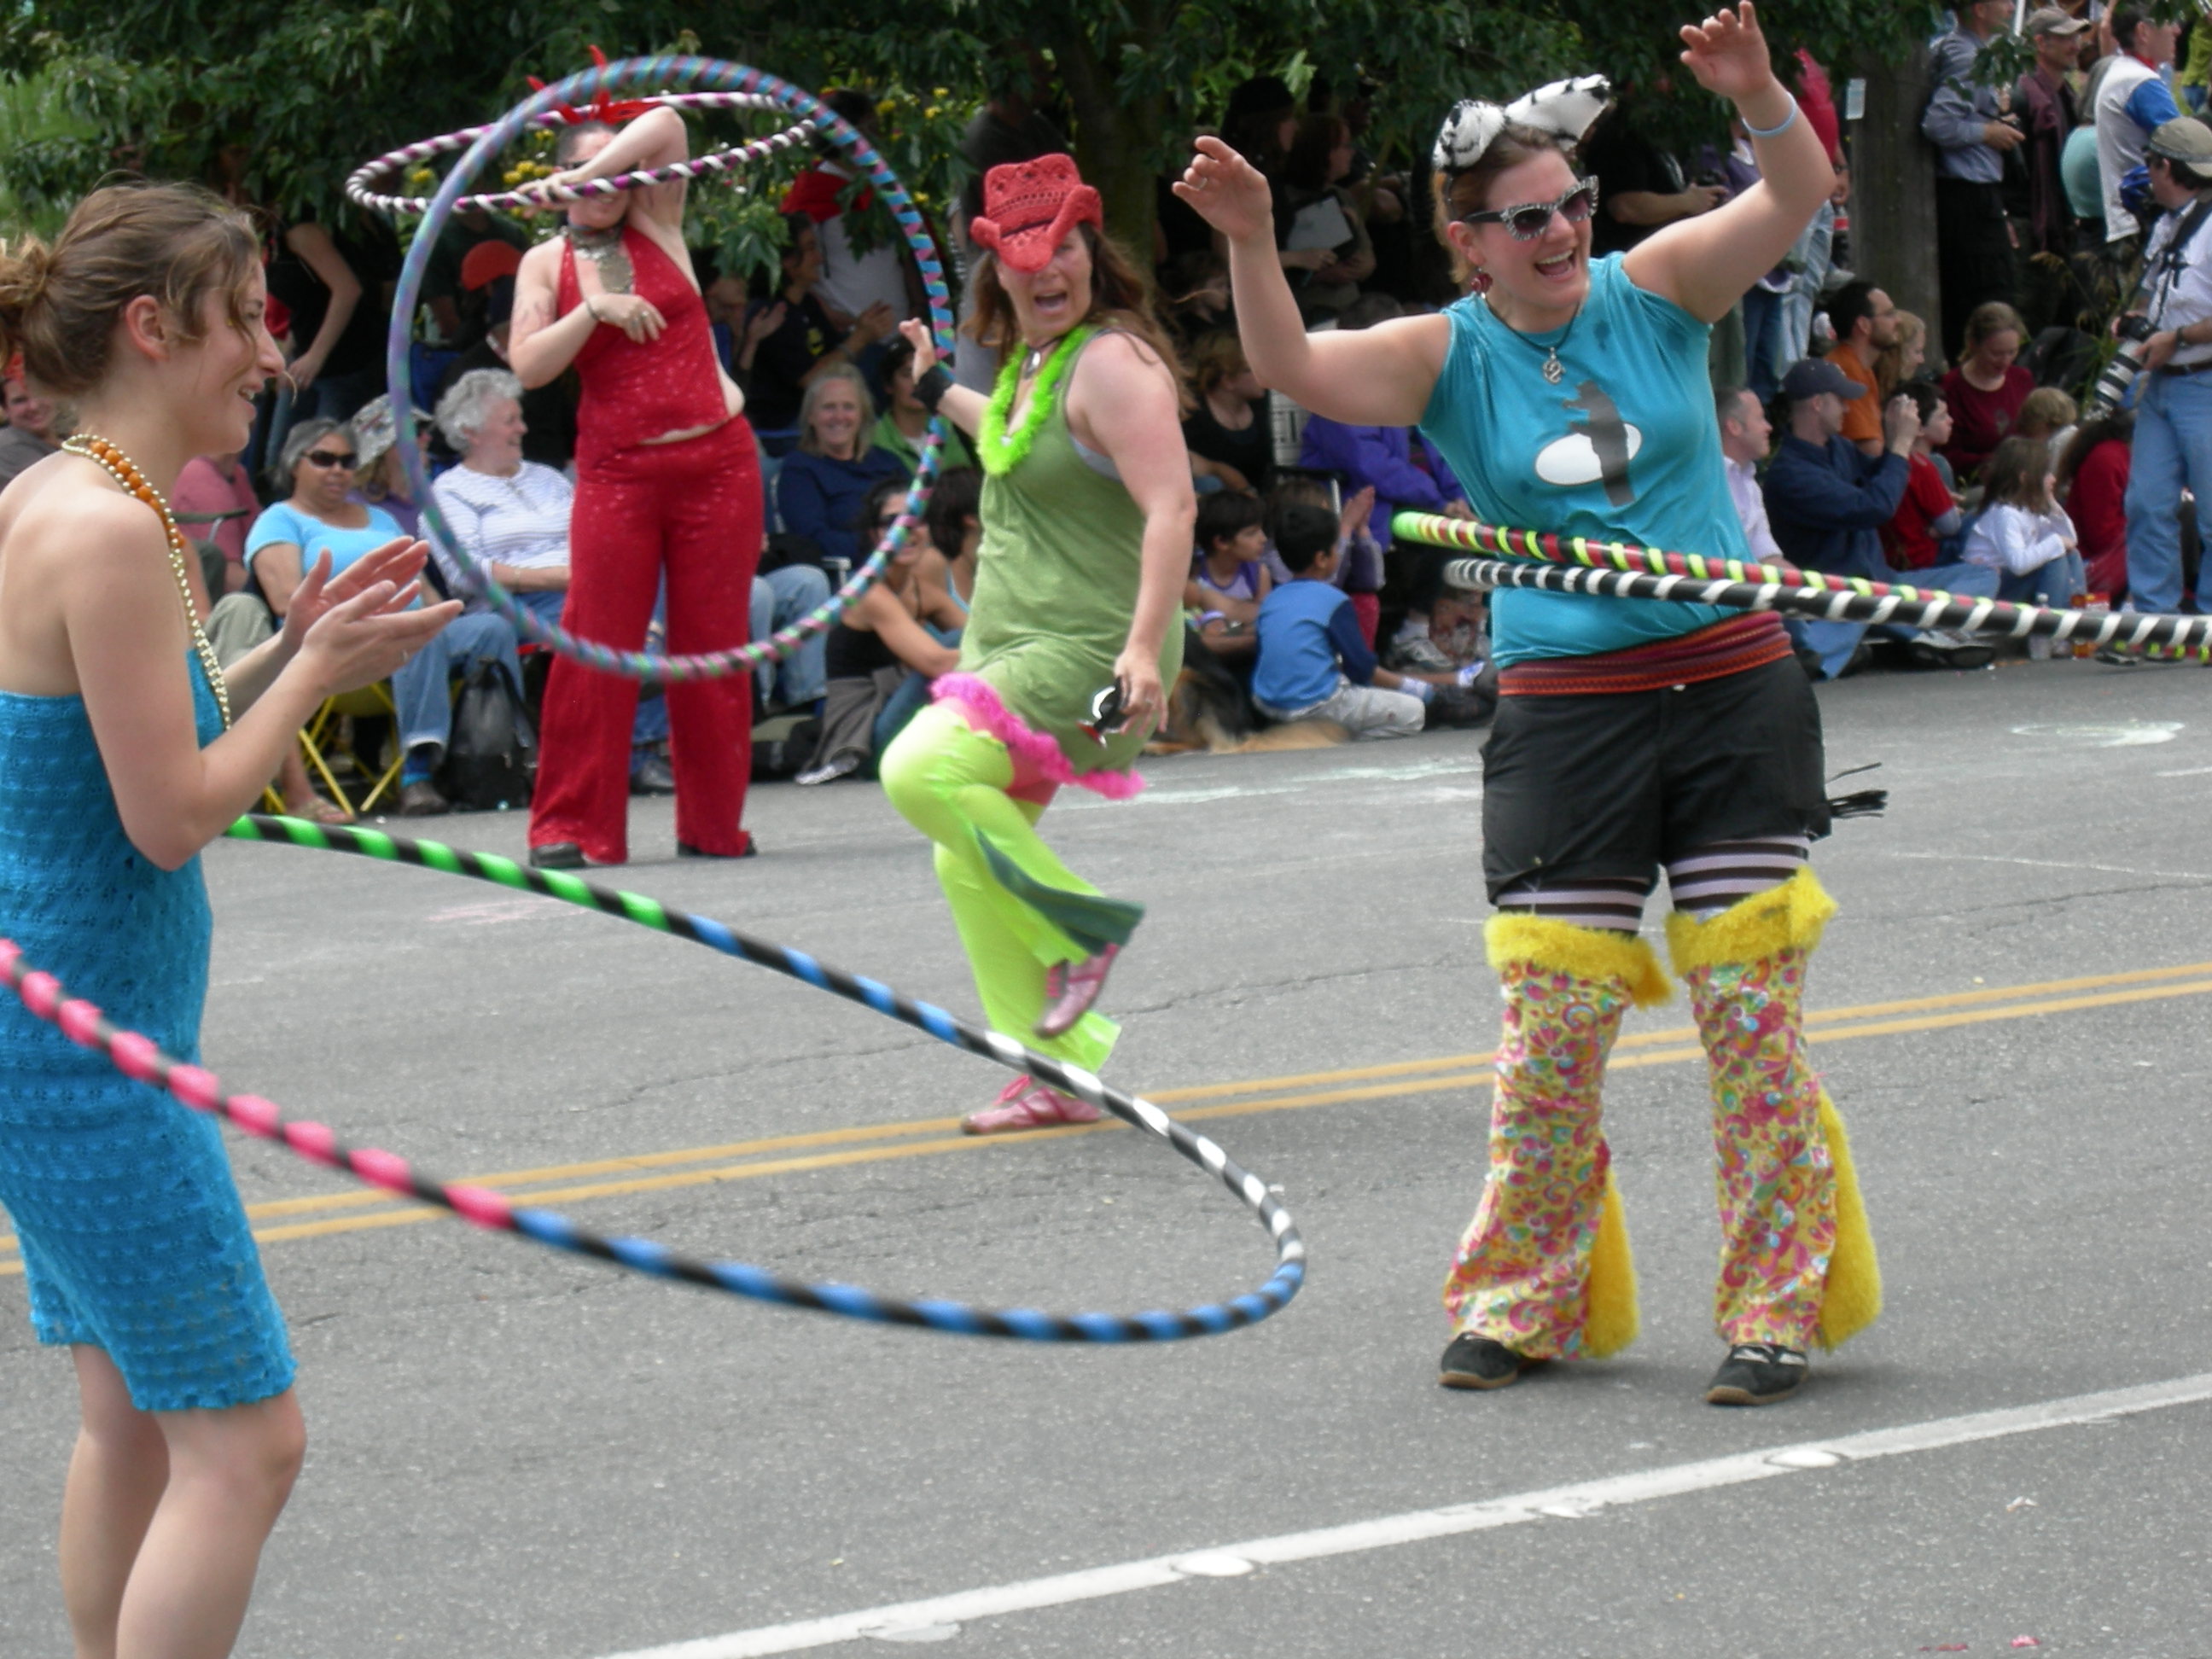 https://commons.wikimedia.org/wiki/File:Fremont_Solstice_Parade_2007_-_hula_hoops_14-3.jpg